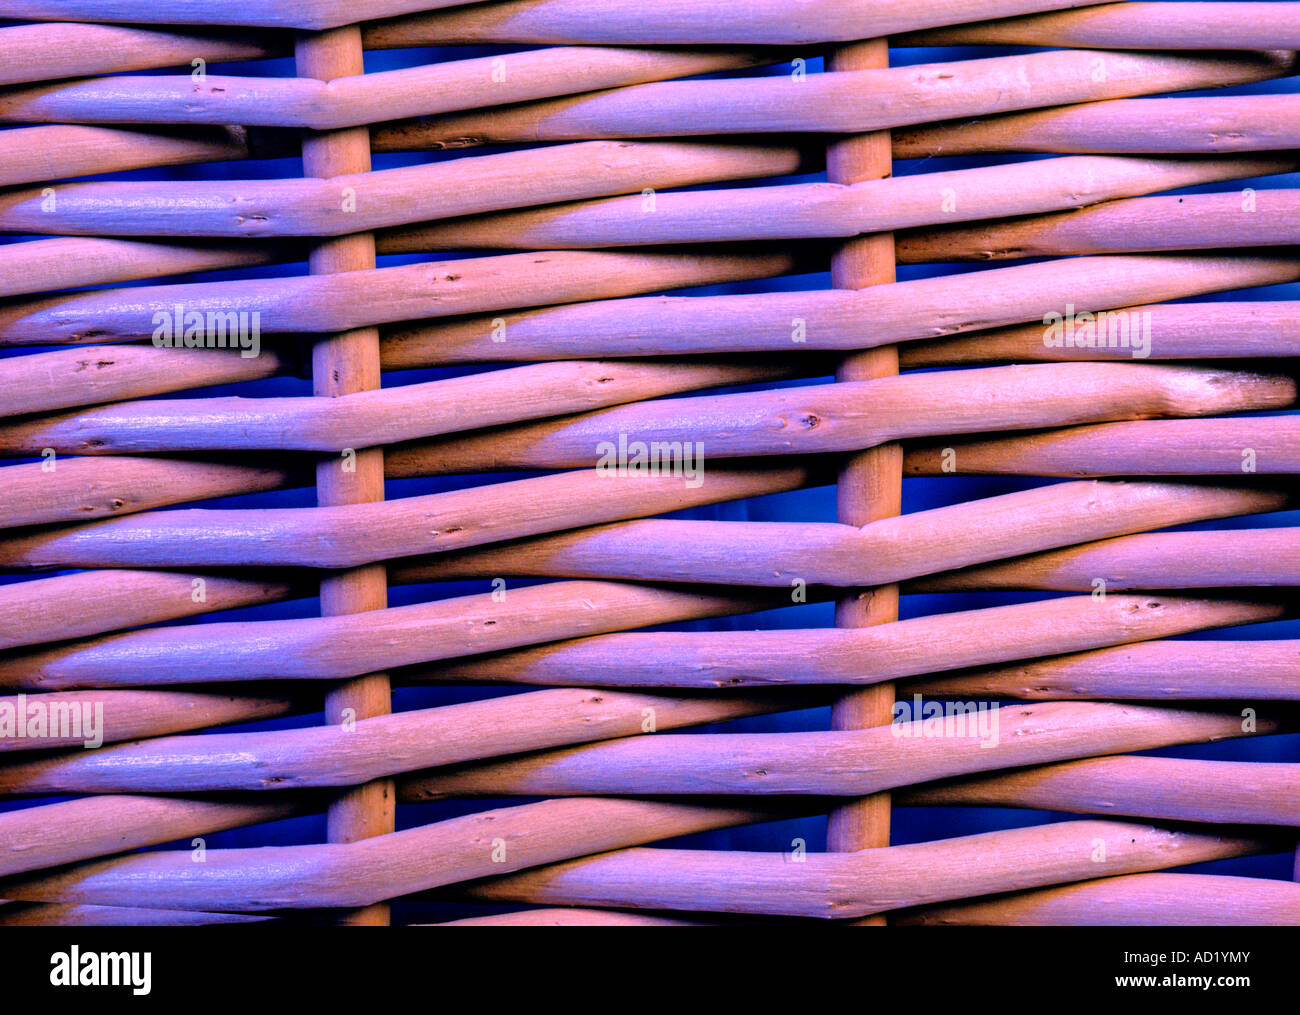 Basket weave Abstract Foto Stock